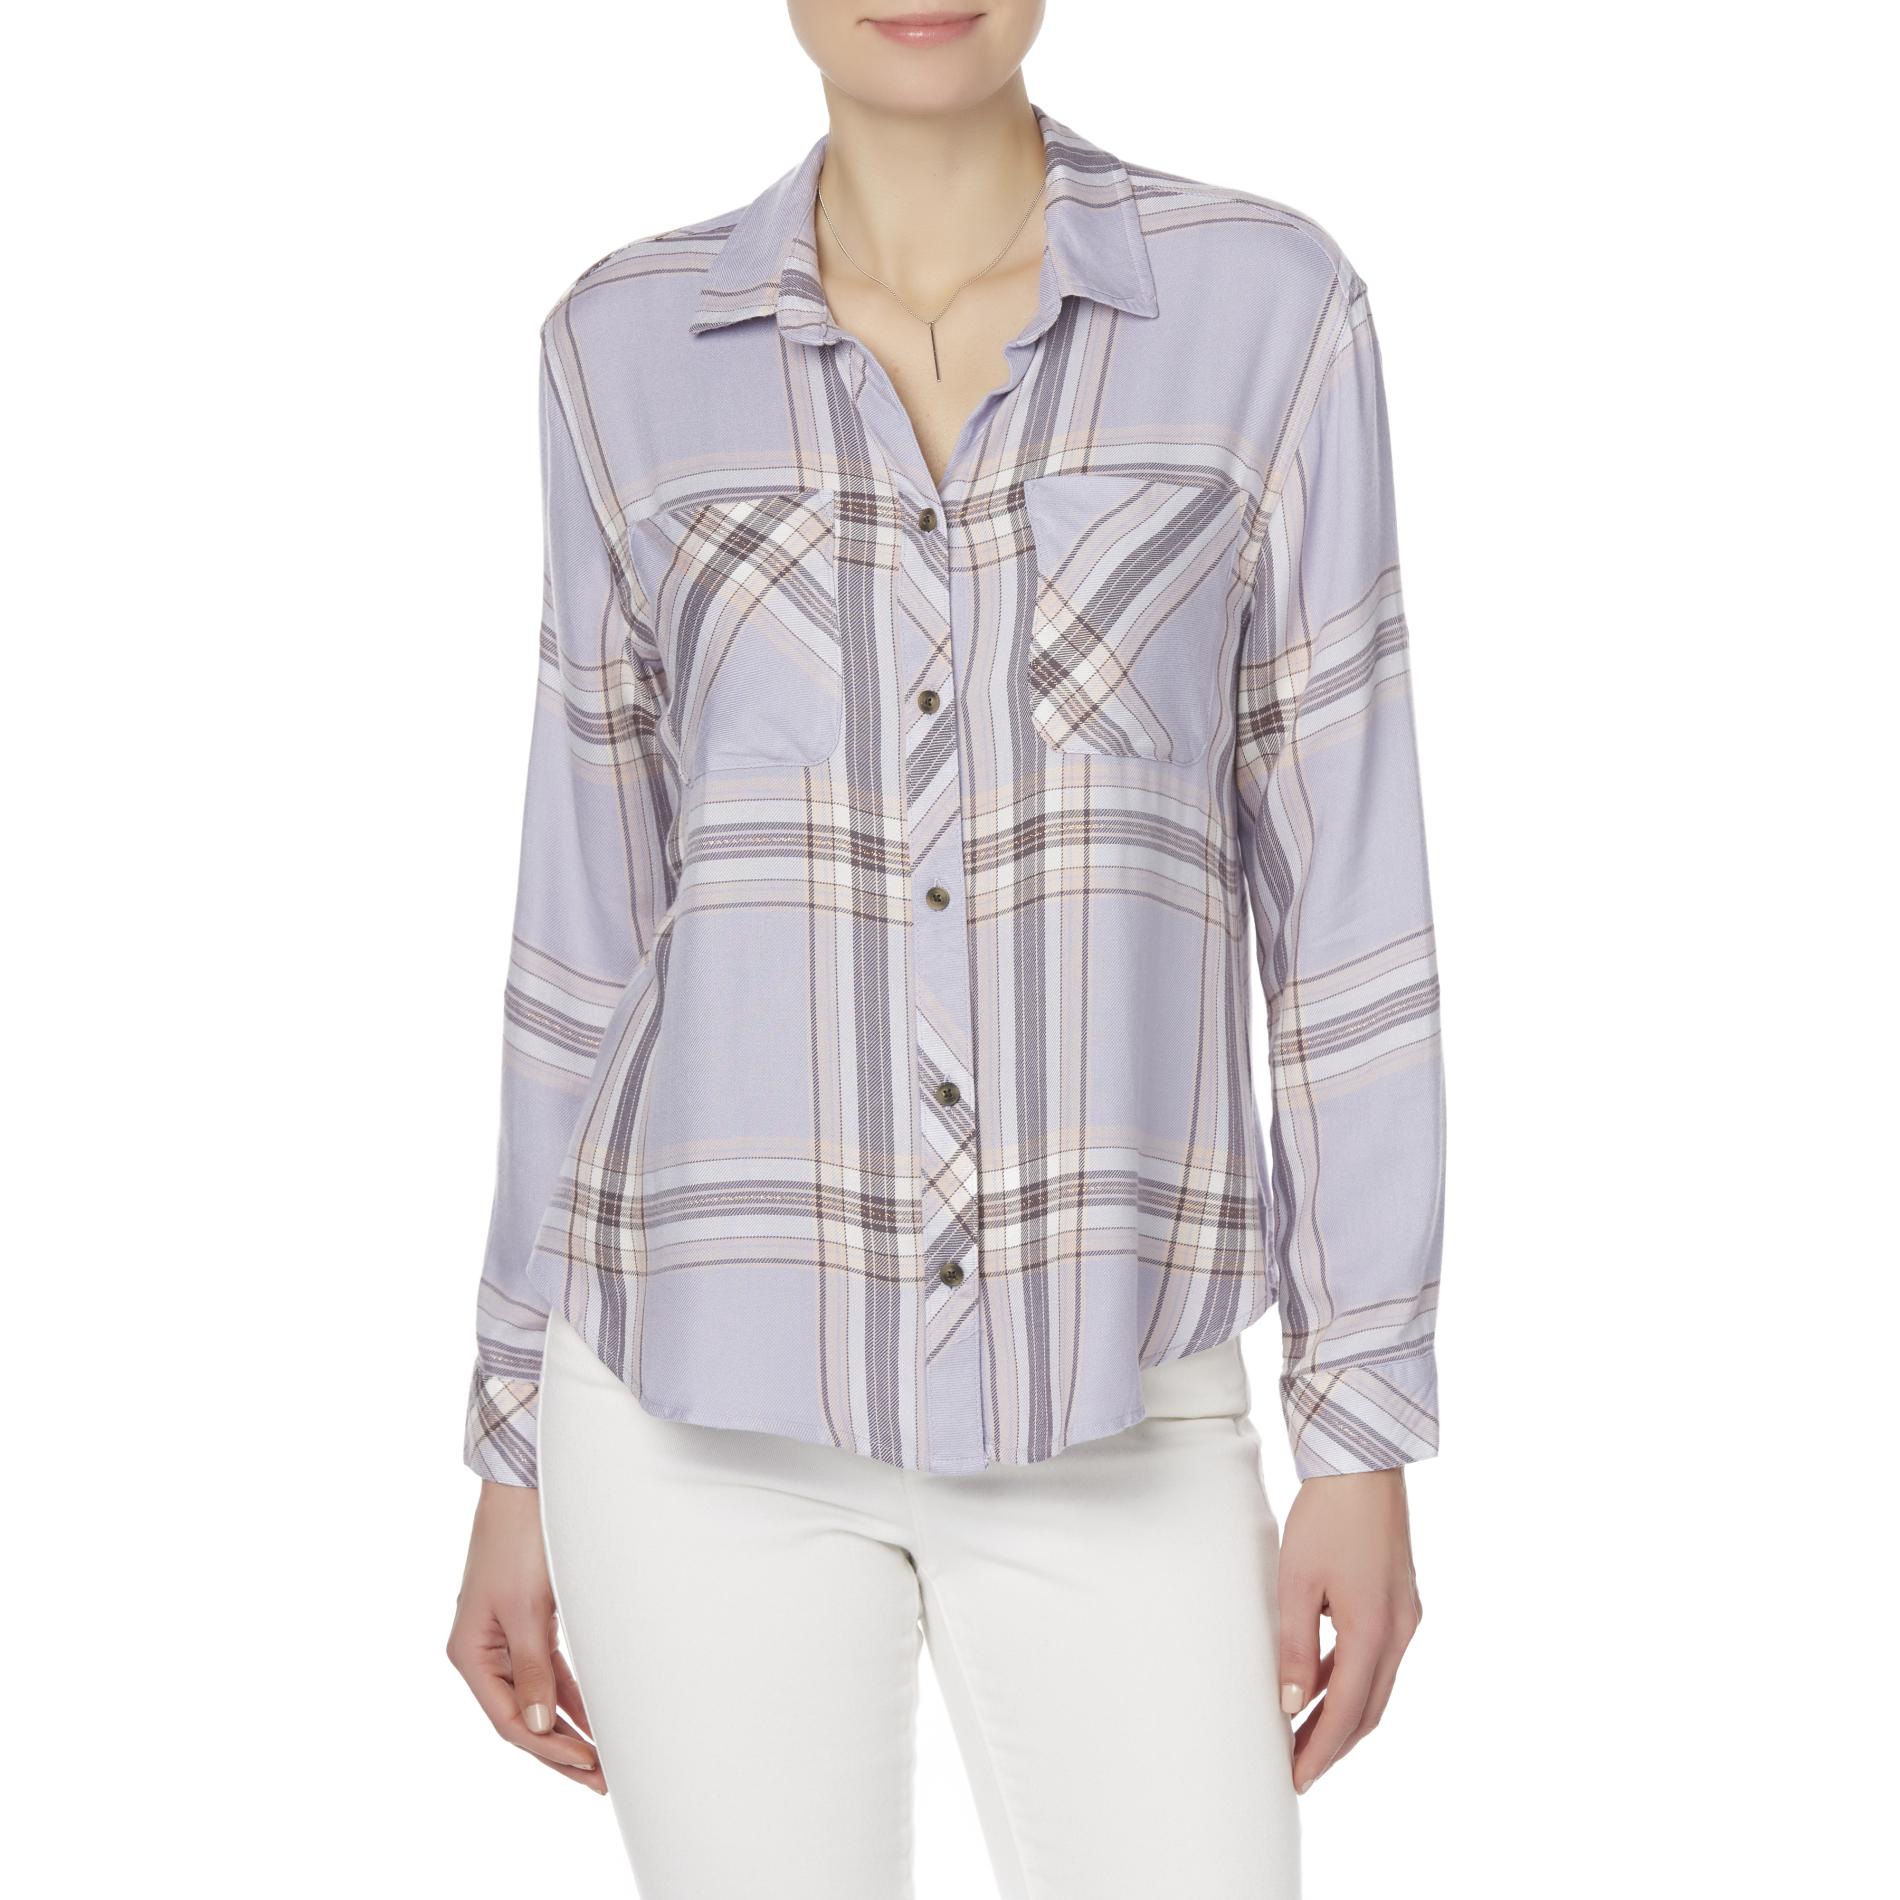 Simply Styled Women's Flannel Shirt - Plaid